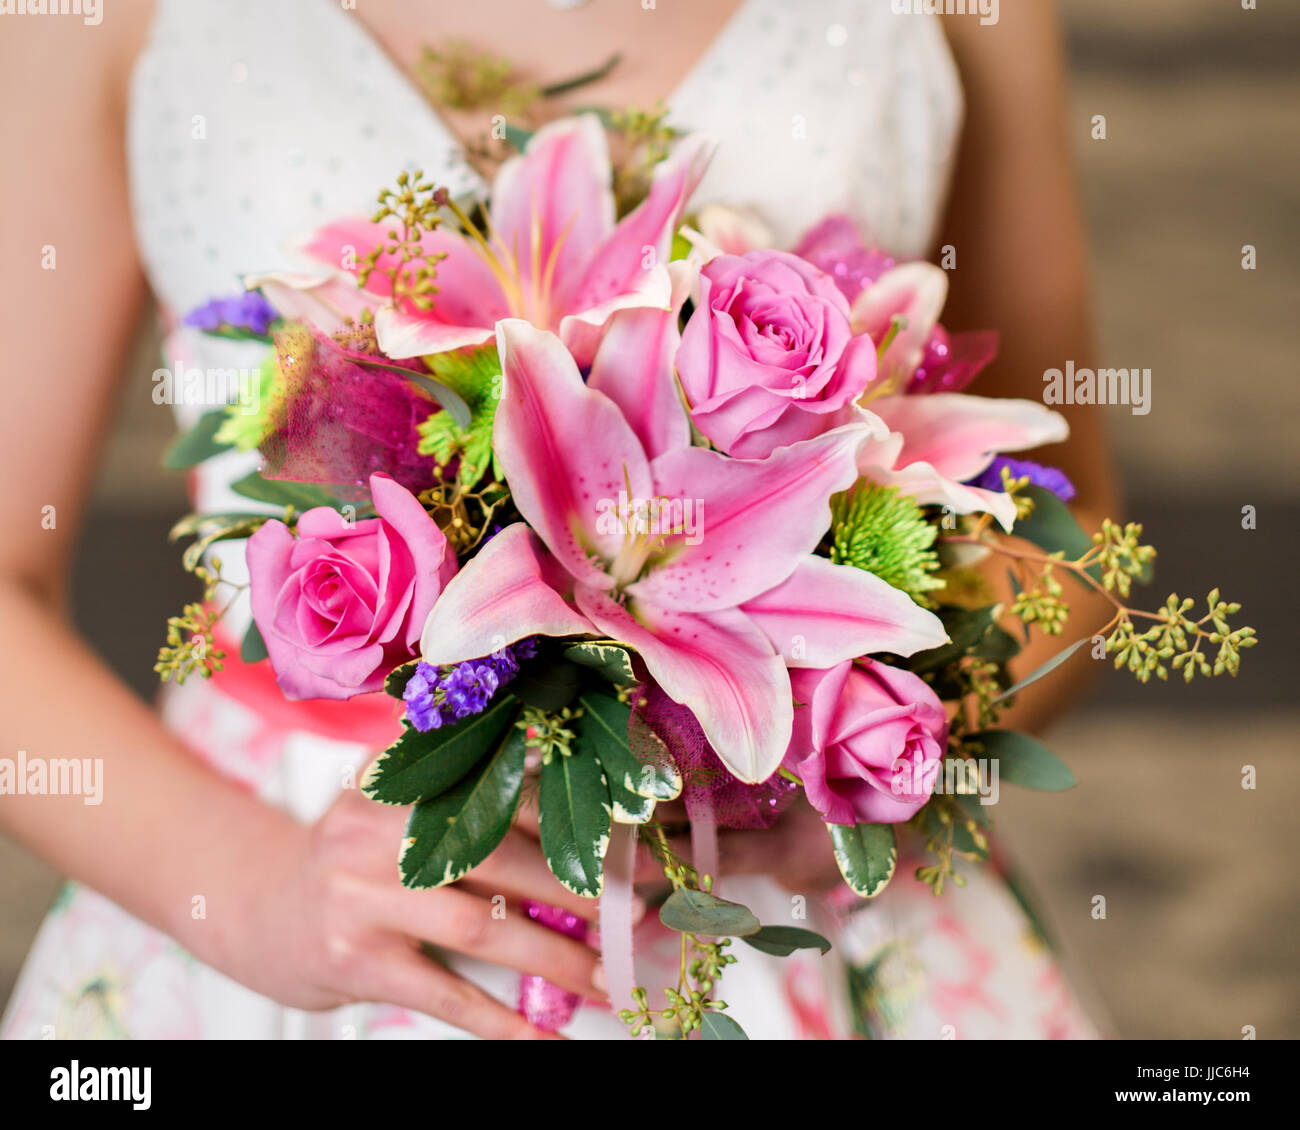 Teen girl holding pink rose and lily bouquet getting ready for prom. Stock Photo